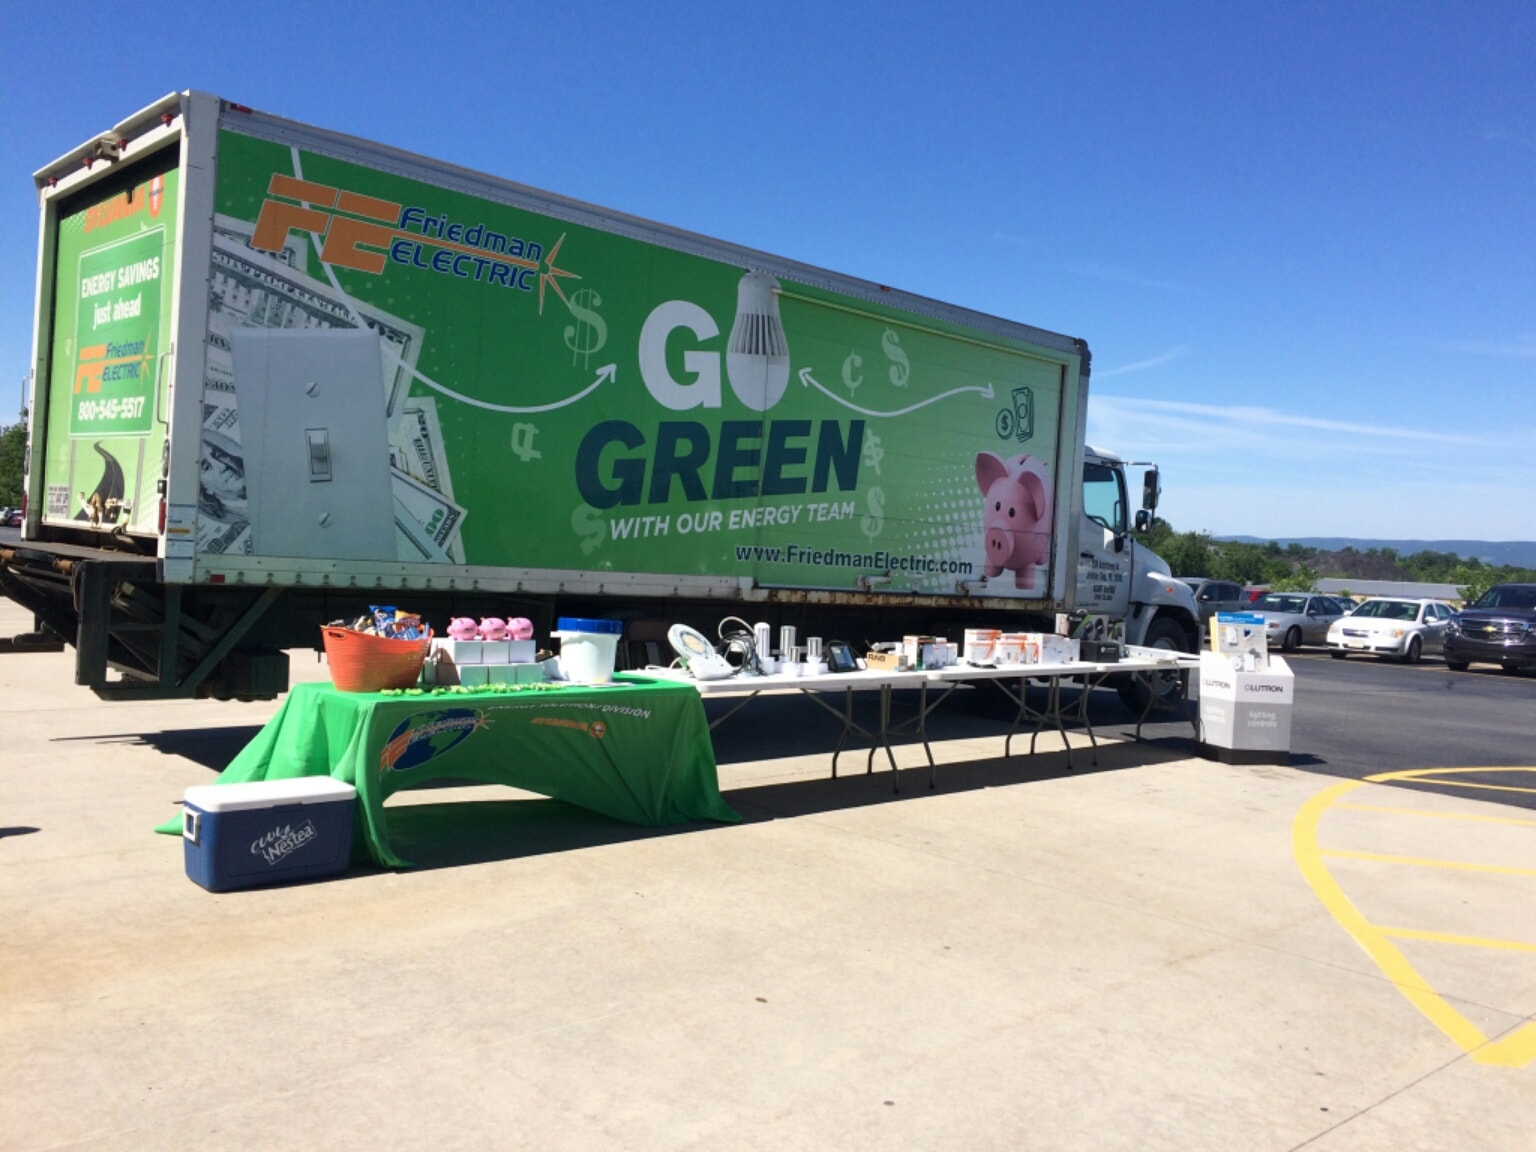 Friedman Electric's Go Green team visits associates at the home office of Benco Dental, the nation's largest privately owned dental distributor on June 10.